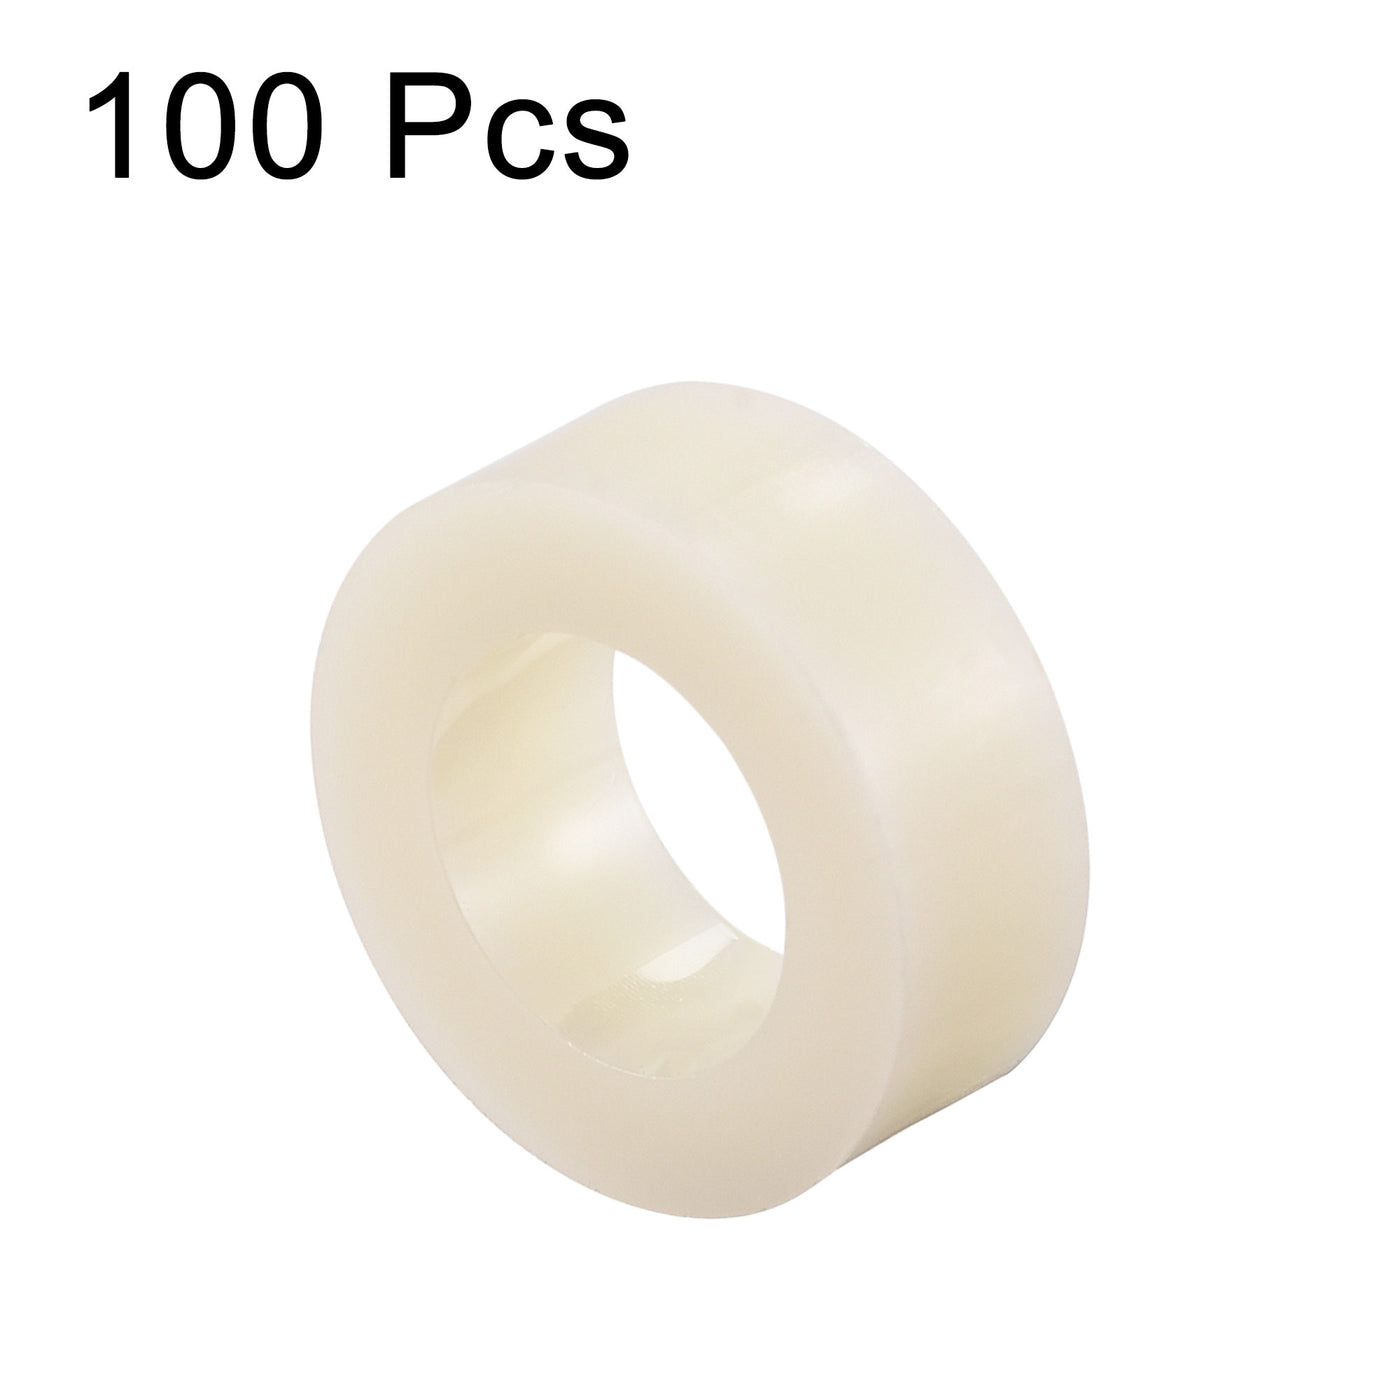 Uxcell Uxcell ABS Round Spacer Washer ID 8.2mm OD 14mm L 12mm for M8 Screws, Beige, 100Pcs